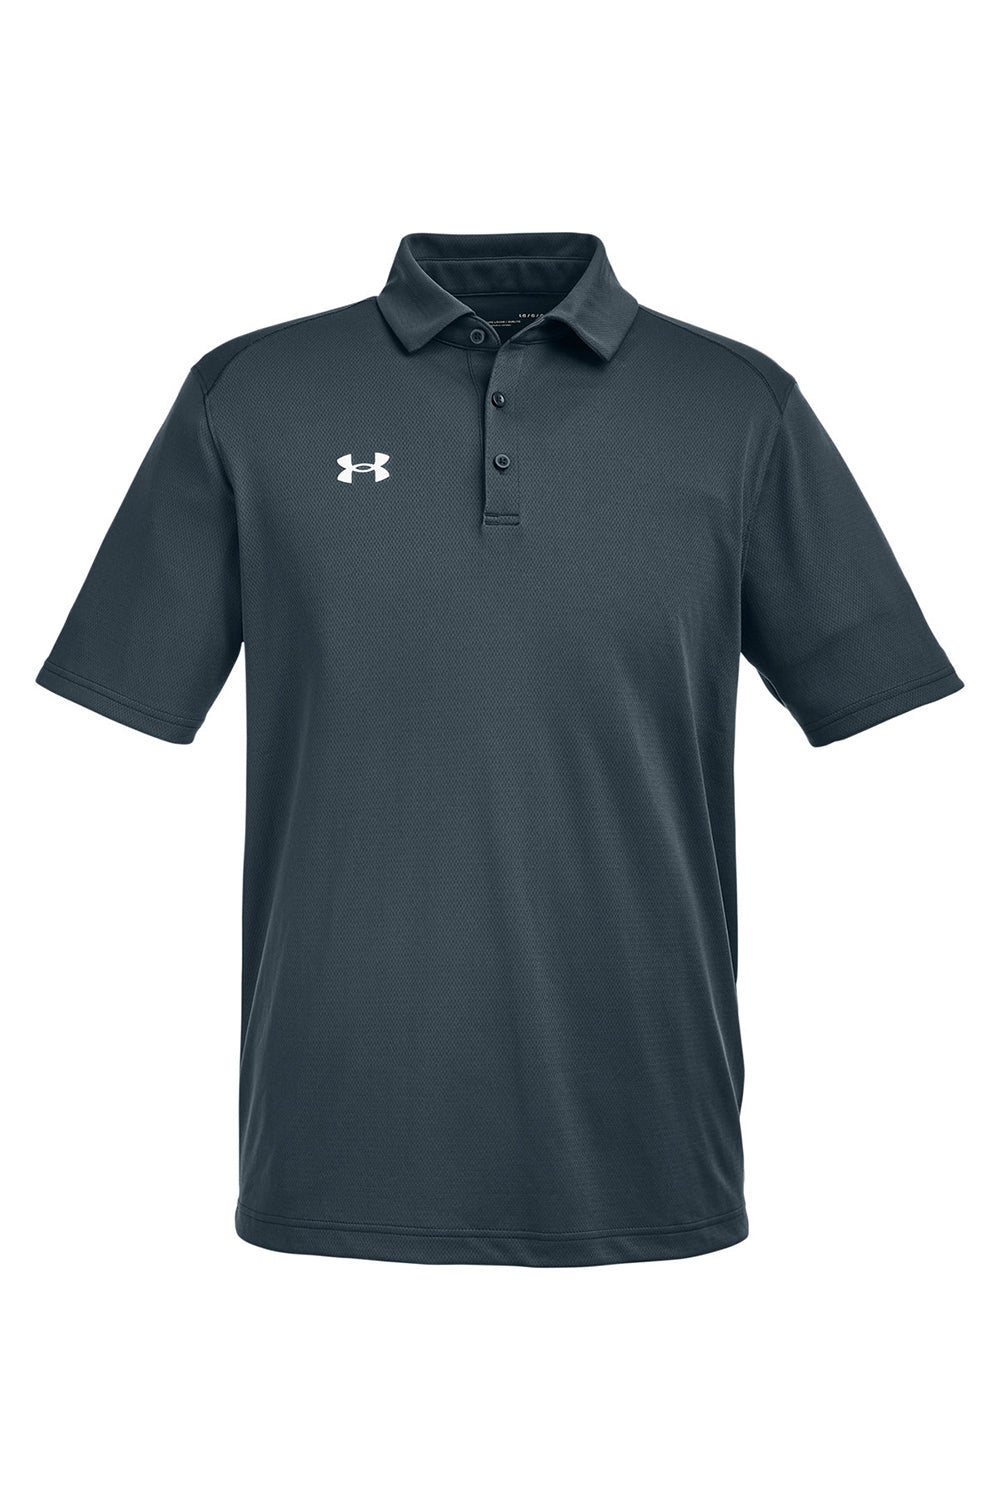 Under Armour 1370399 Mens Tech Moisture Wicking Short Sleeve Polo Shirt Stealth Grey Flat Front